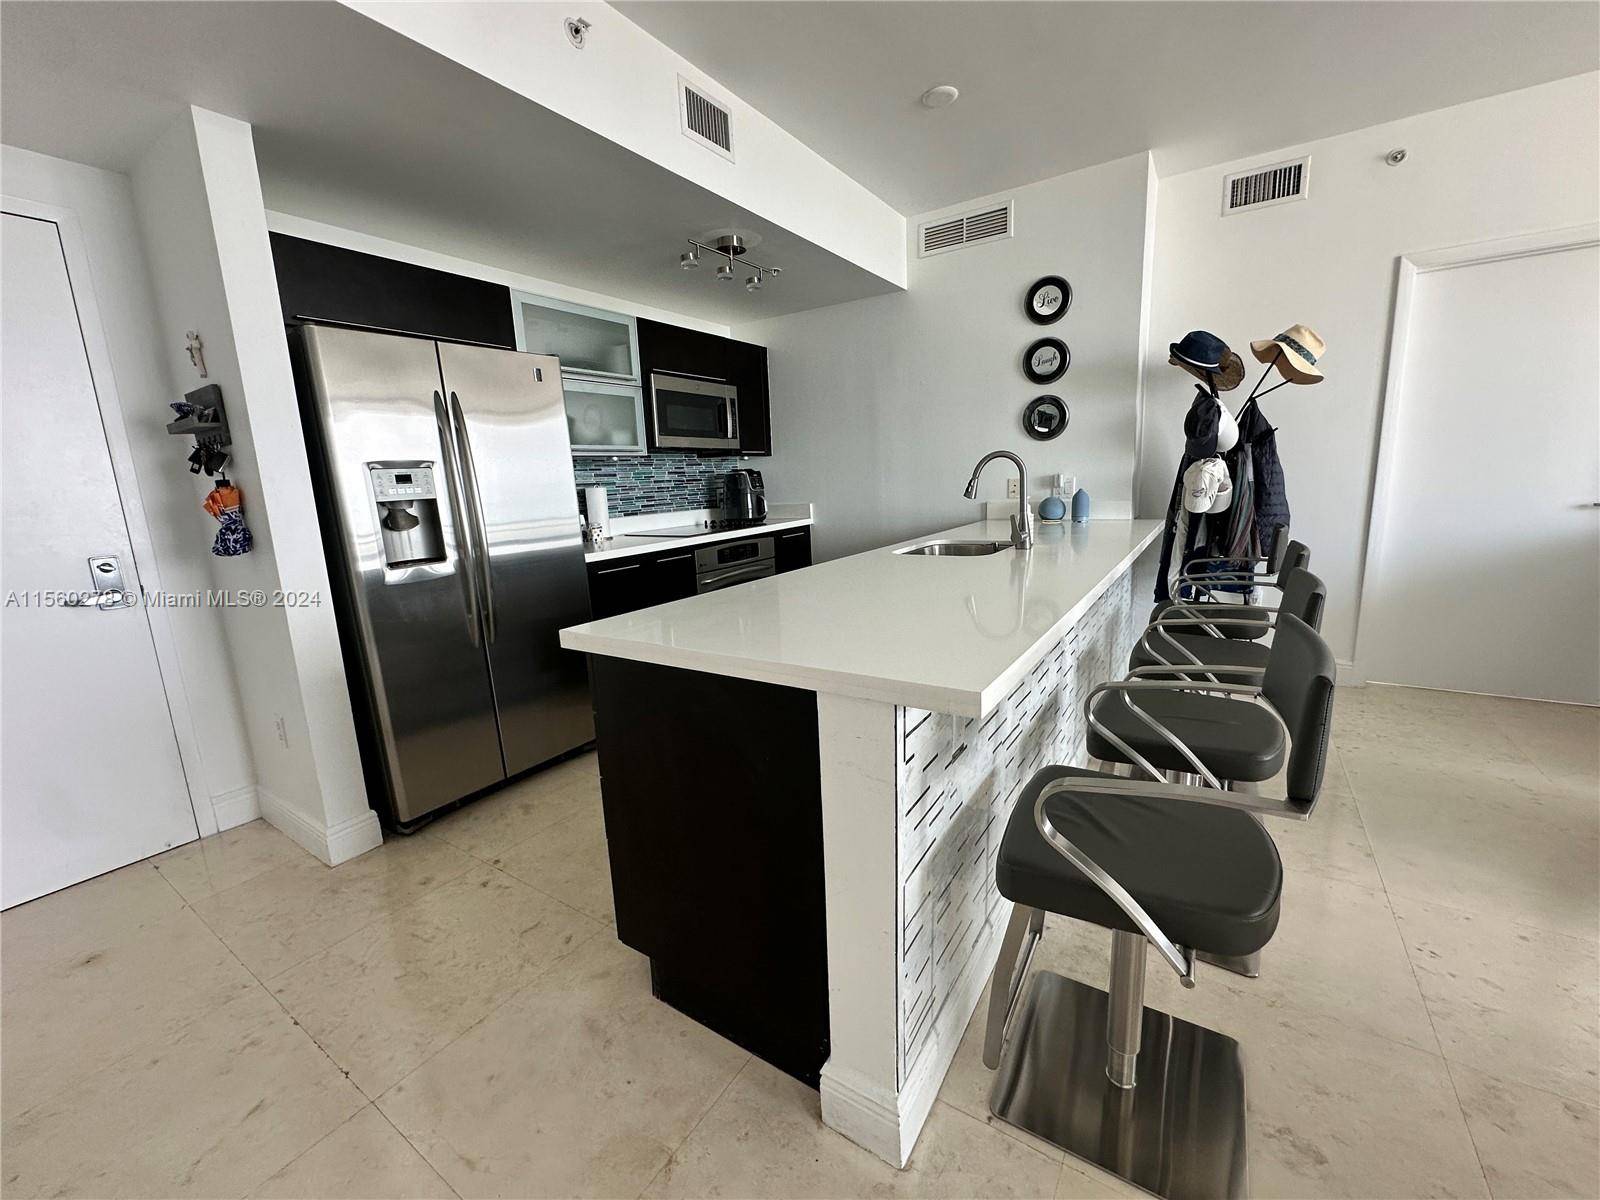 Fully Furnished apartment for rent, ready to move in, Spacious unit with Great open View to Miami River and Downtown Skyline, conveniently located near Downtown, Brickell, Metro mover station, Resort ...